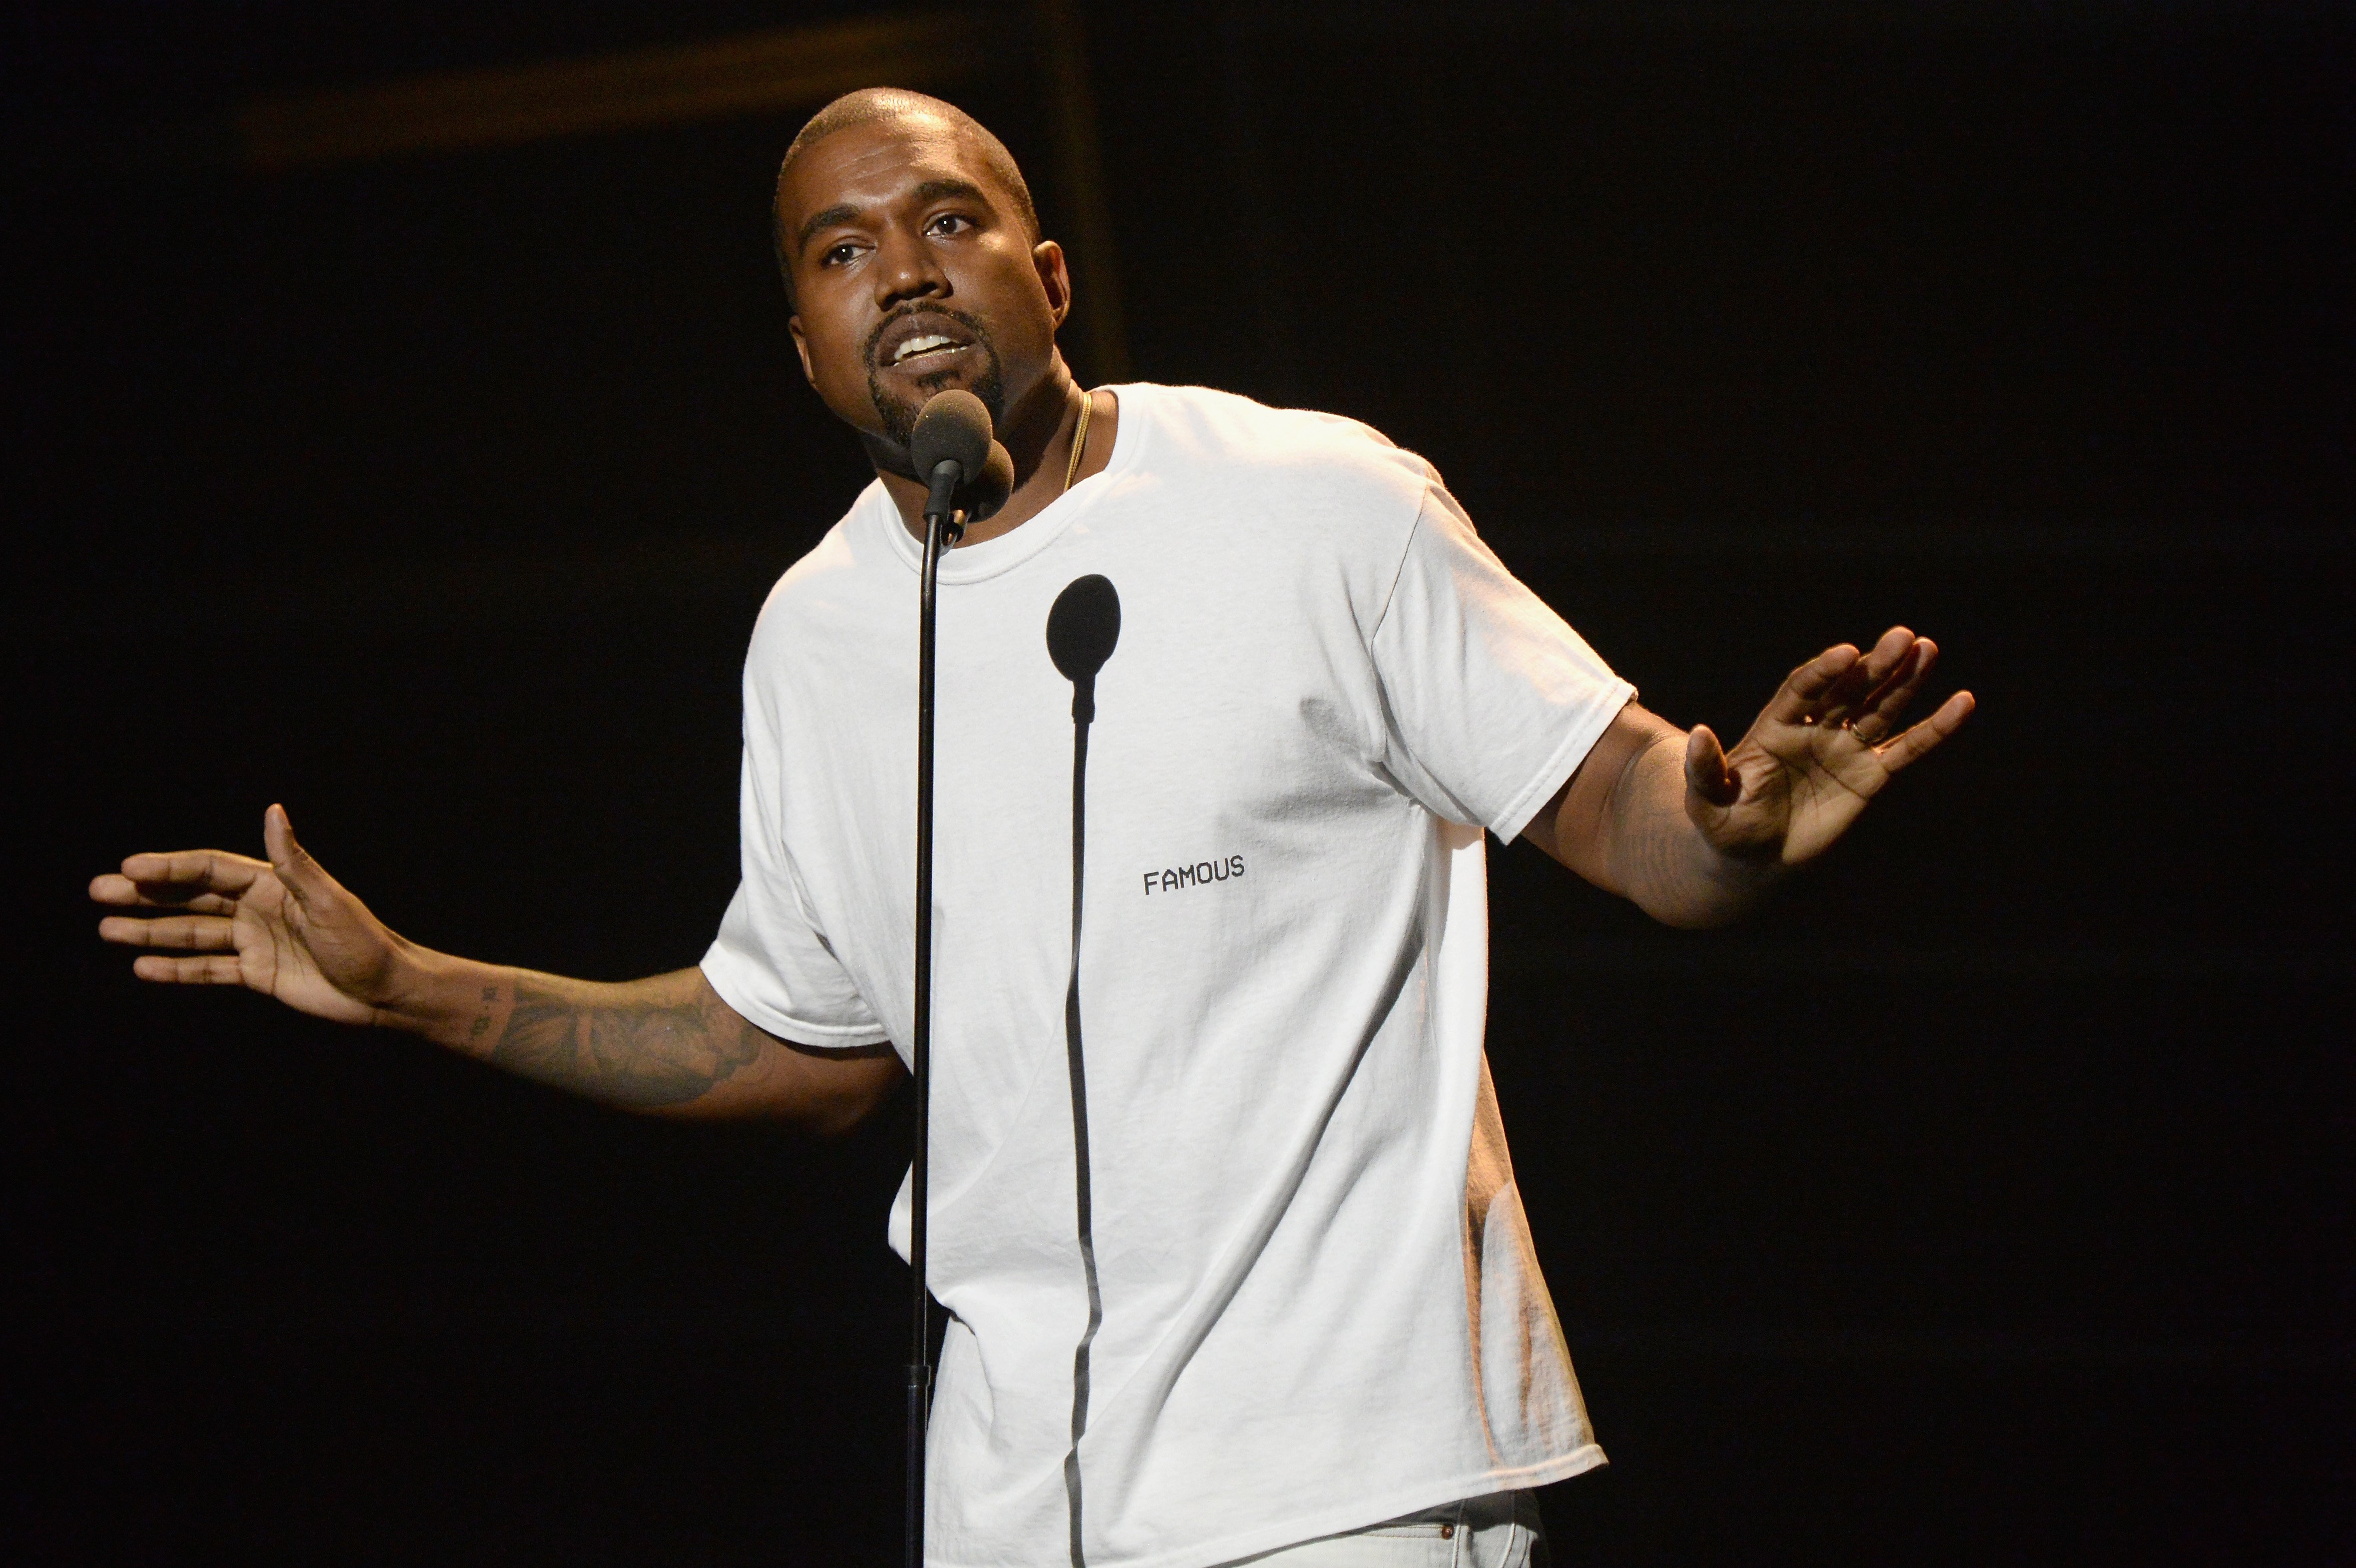 Kanye West speaks onstage during the 2016 MTV Video Music Awards at Madison Square Garden on August 28, 2016 in New York City | Photo: GettyImages